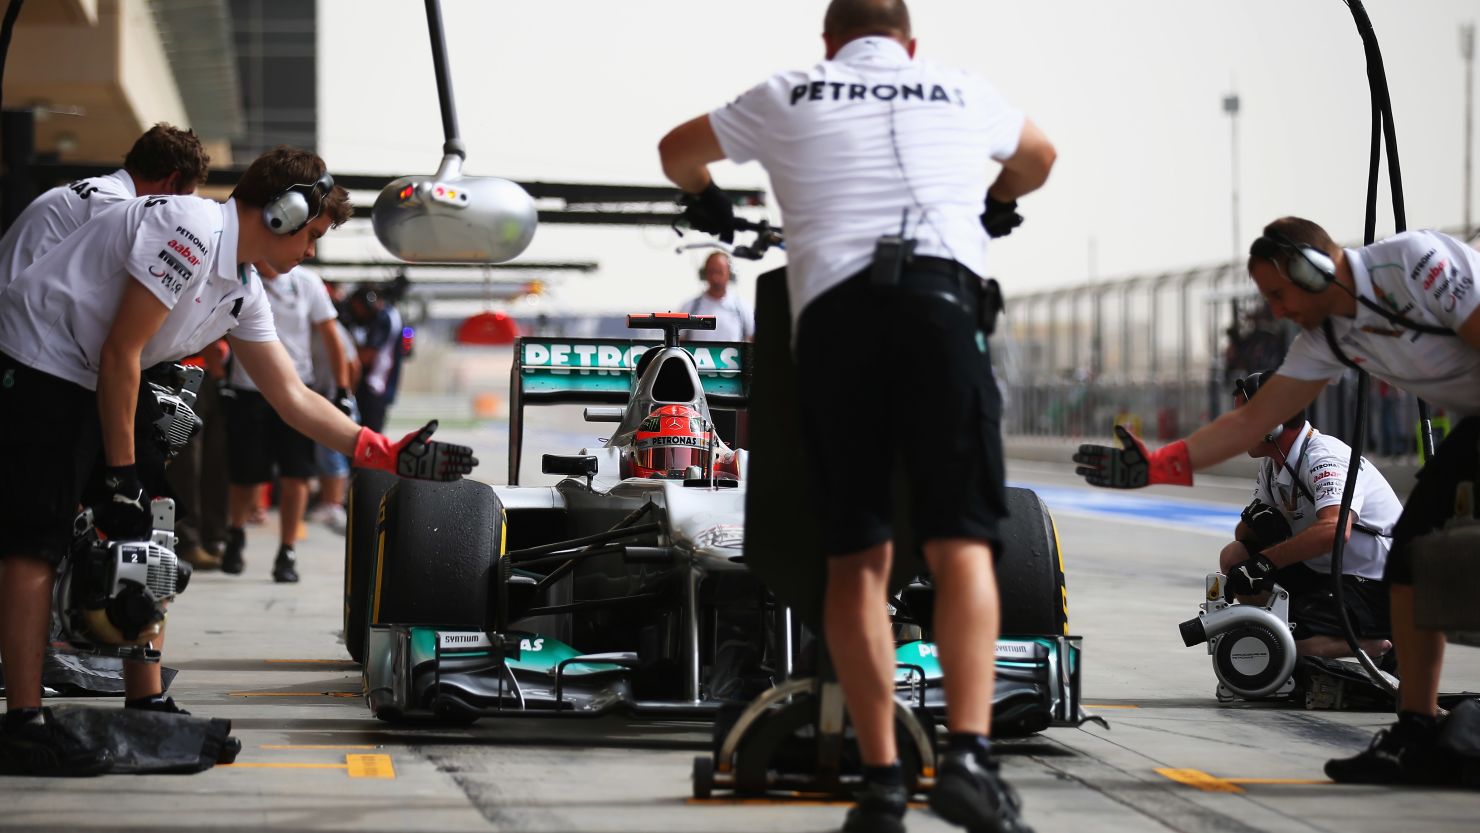 Michael Schumacher came from 22nd to finish 10th for Mercedes in Bahrain but was still unhappy with his tires